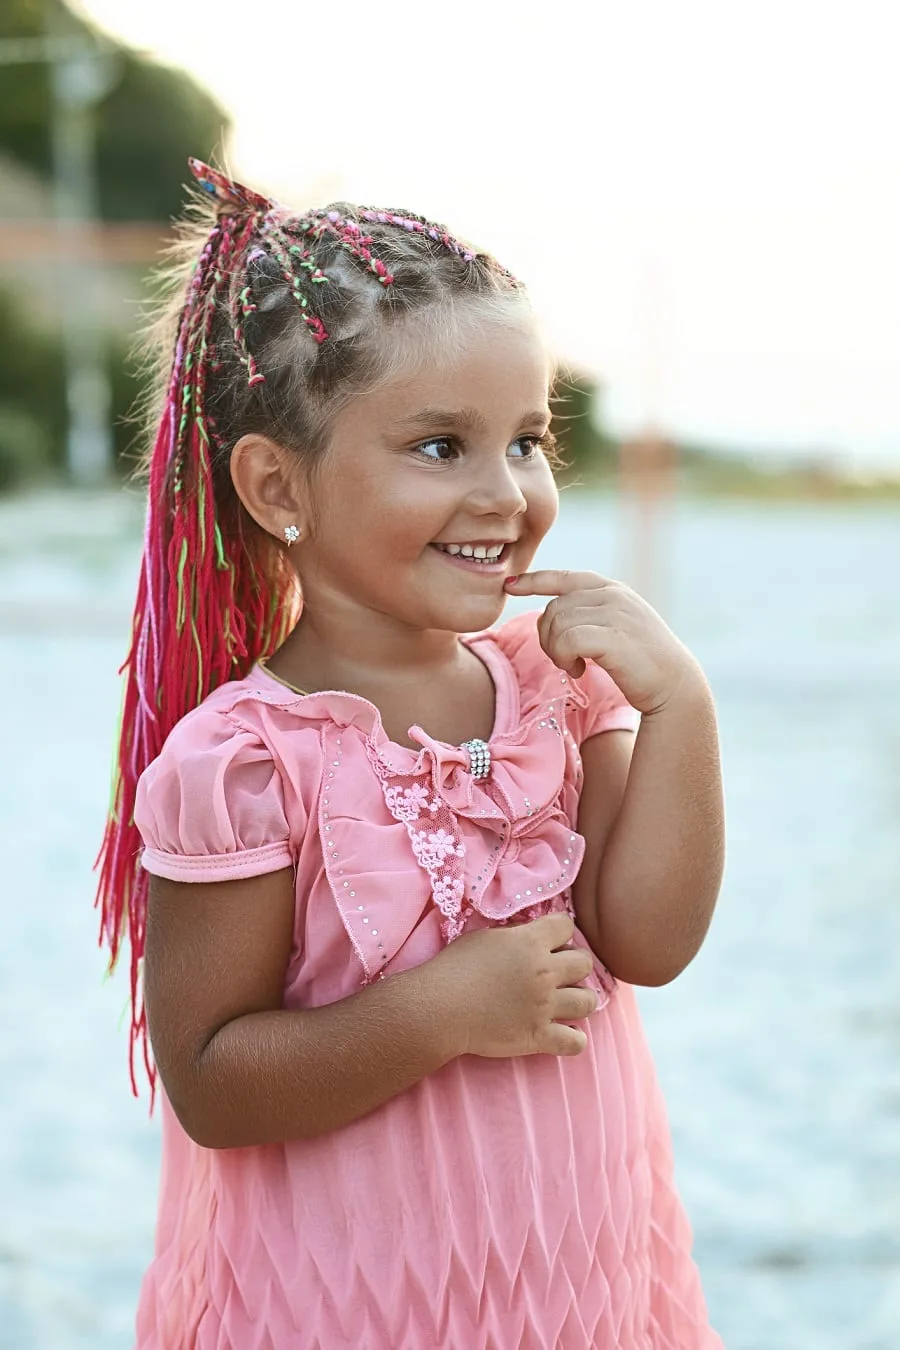 little girl with braided ponytail